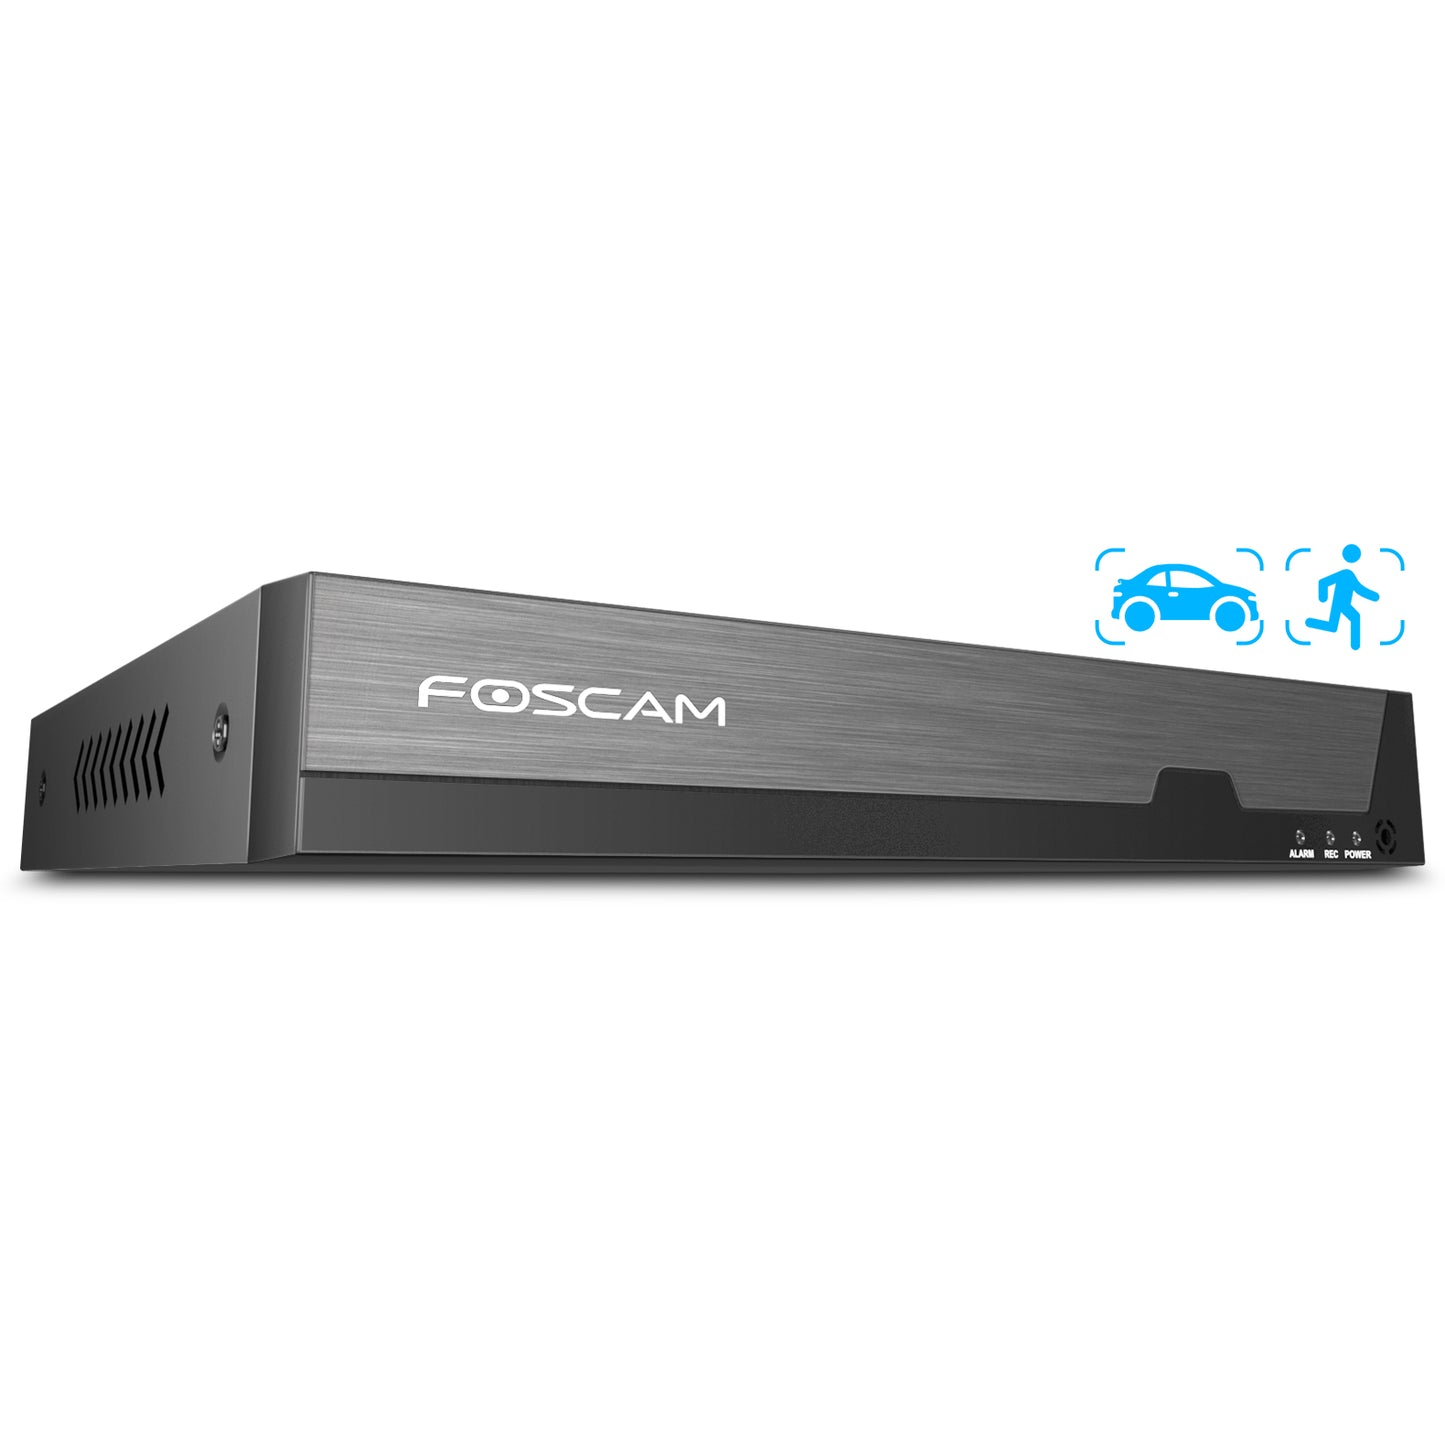 Foscam 5MP HD 8 Channel POE Home Security Camera System,Up To 10TB HDD Capacity